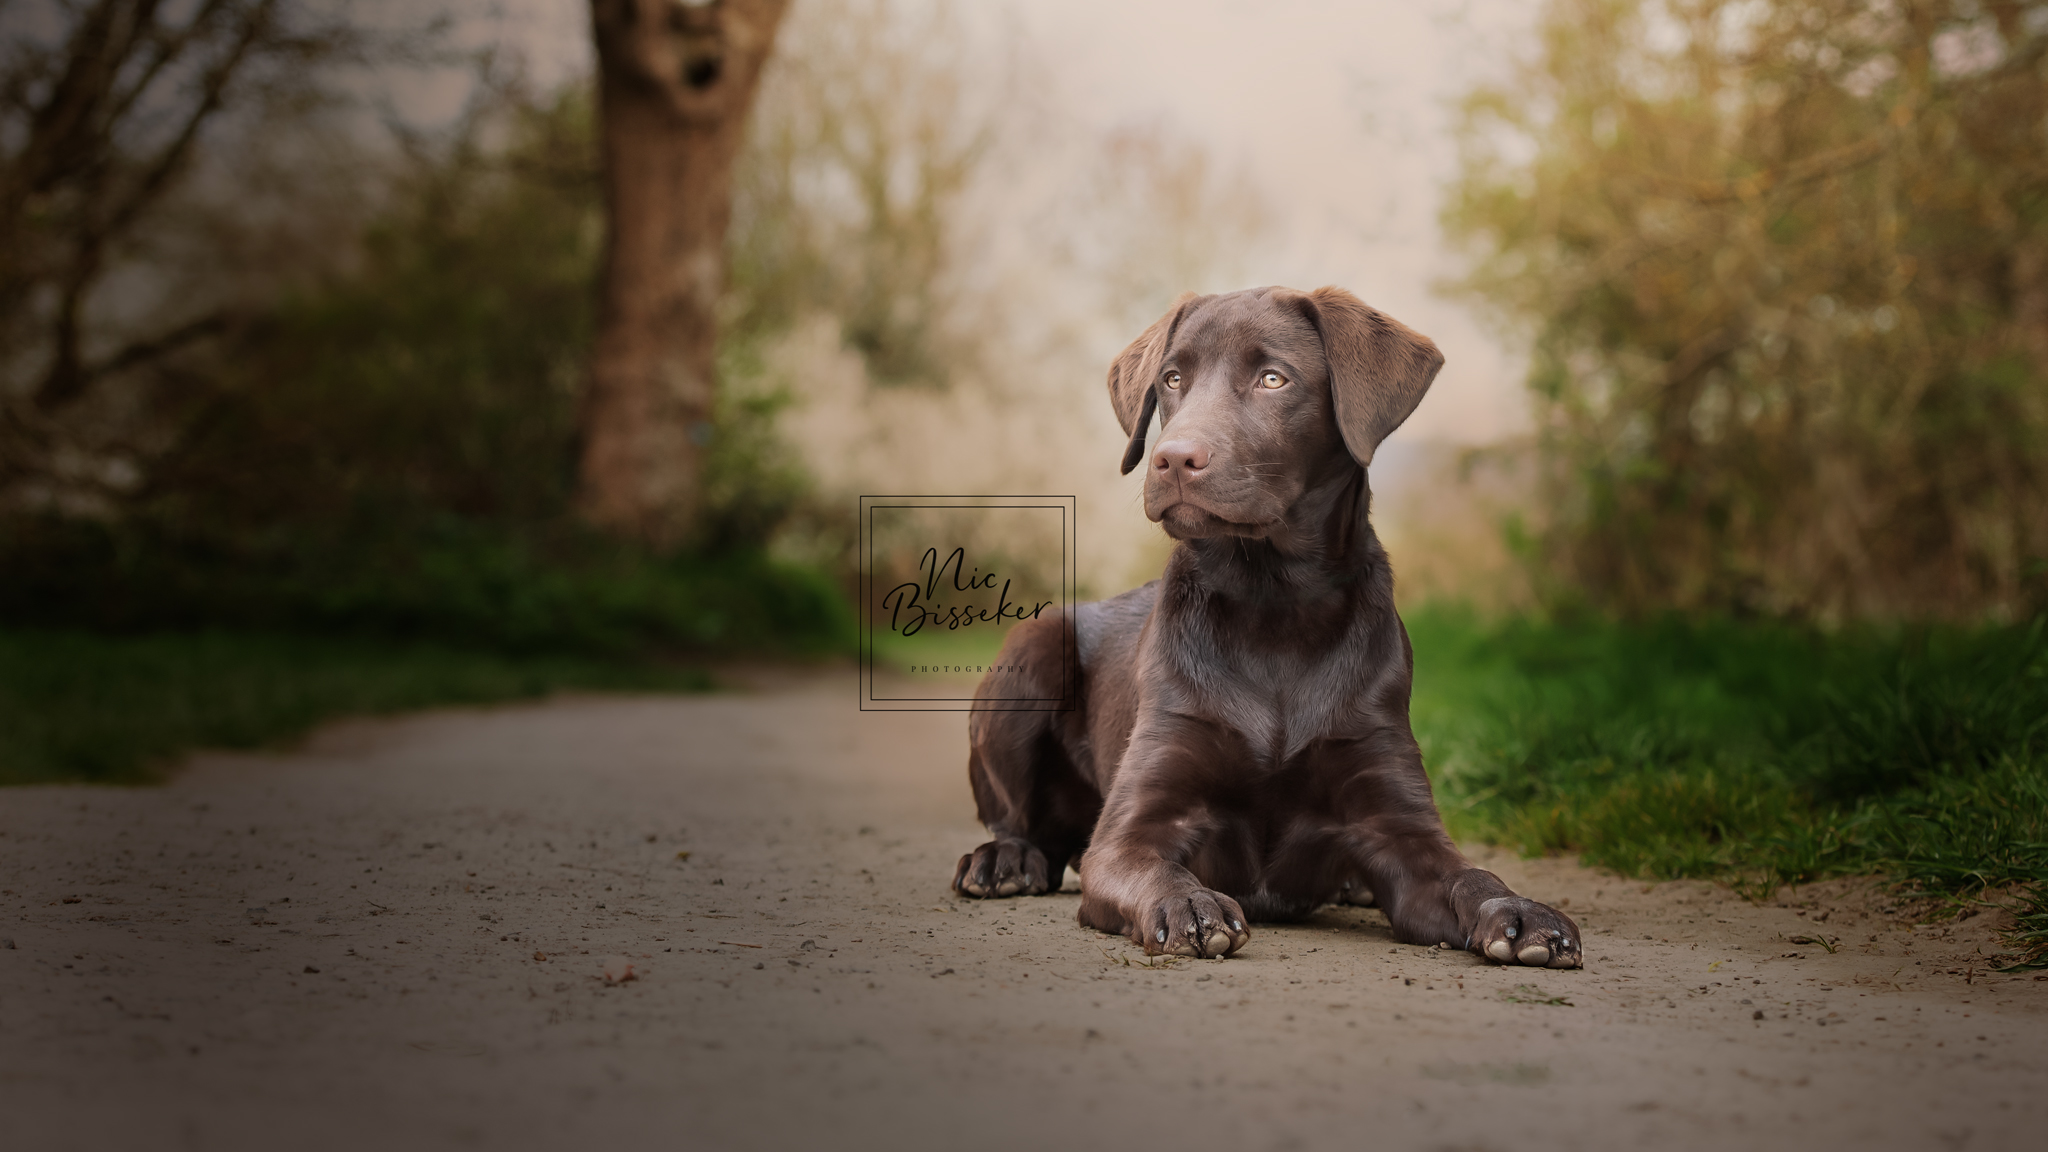 Nic Bisseker Photography puppy photographer east grinstead